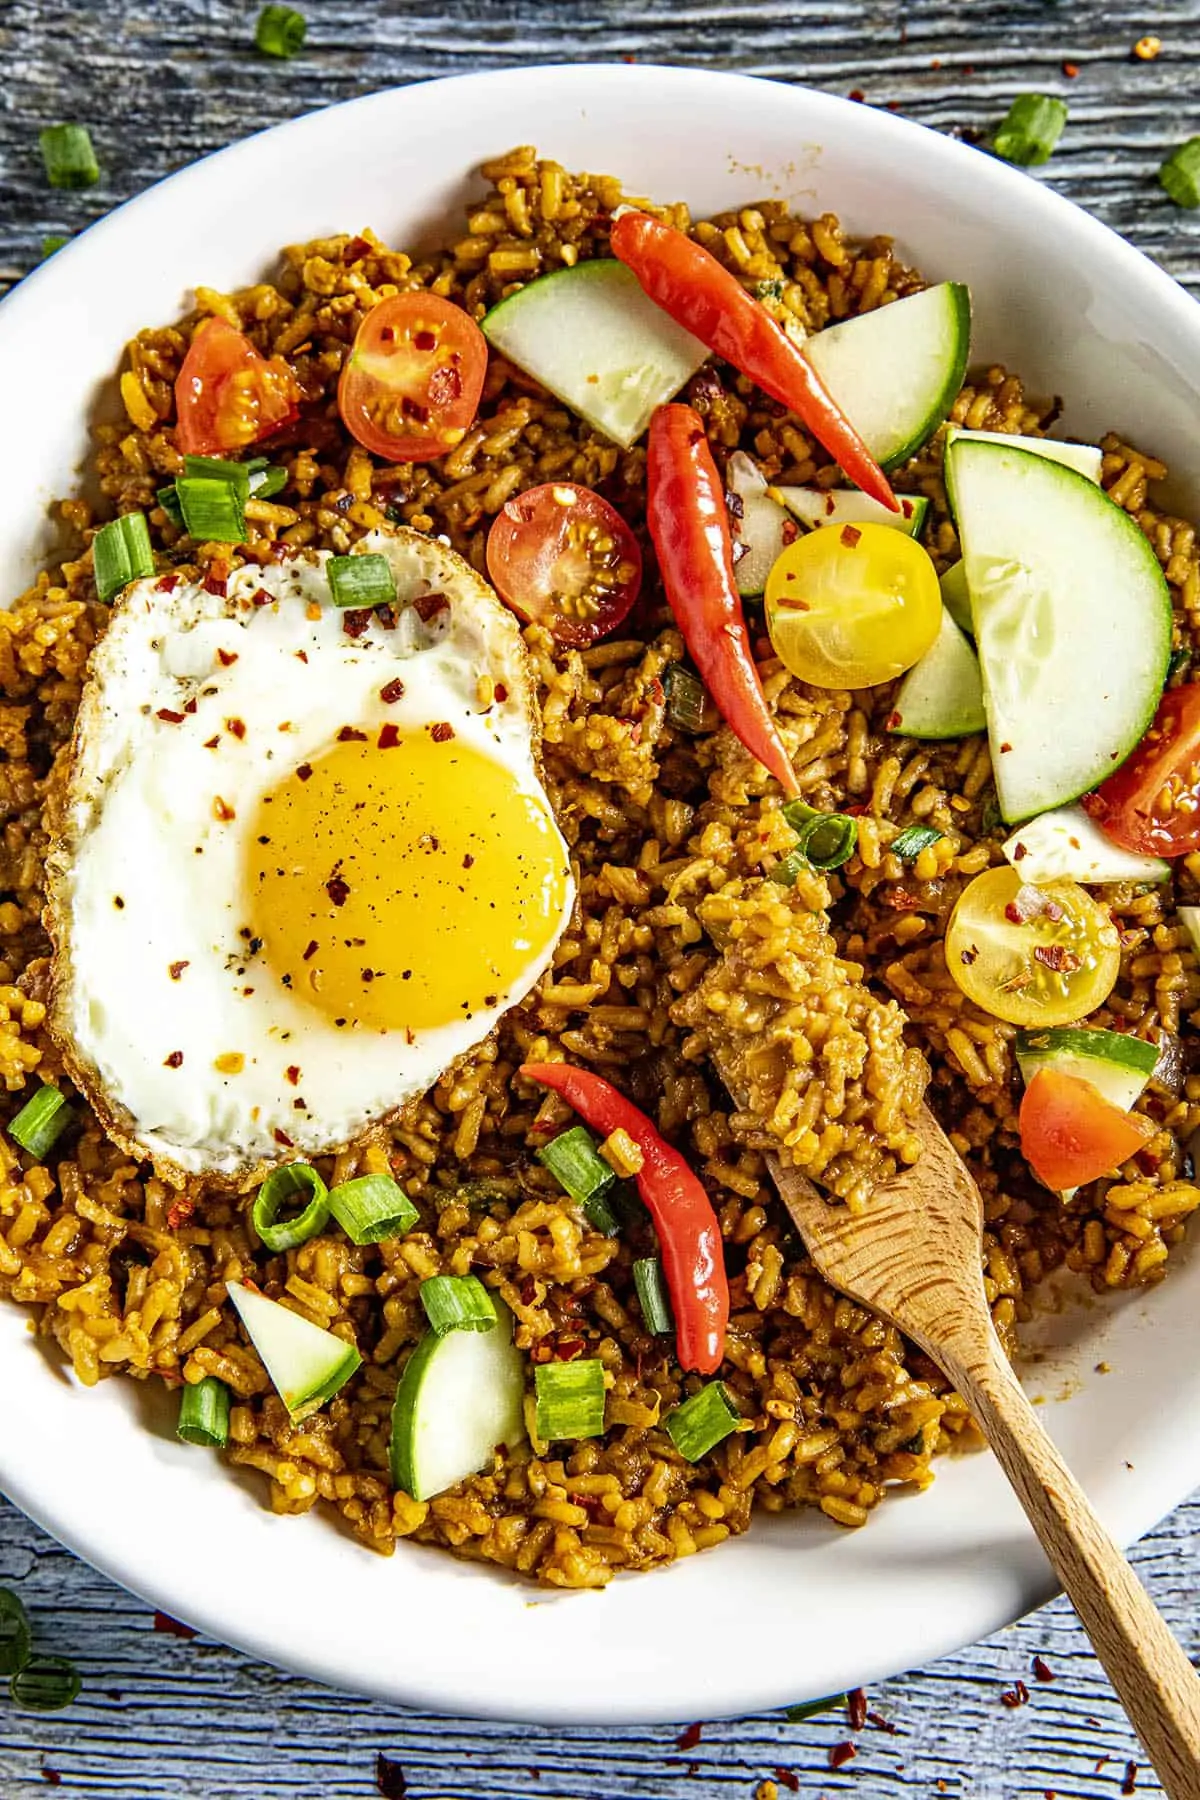 Taking a forkful of Indonesian Fried Rice (Nasi Goreng) from a bowl